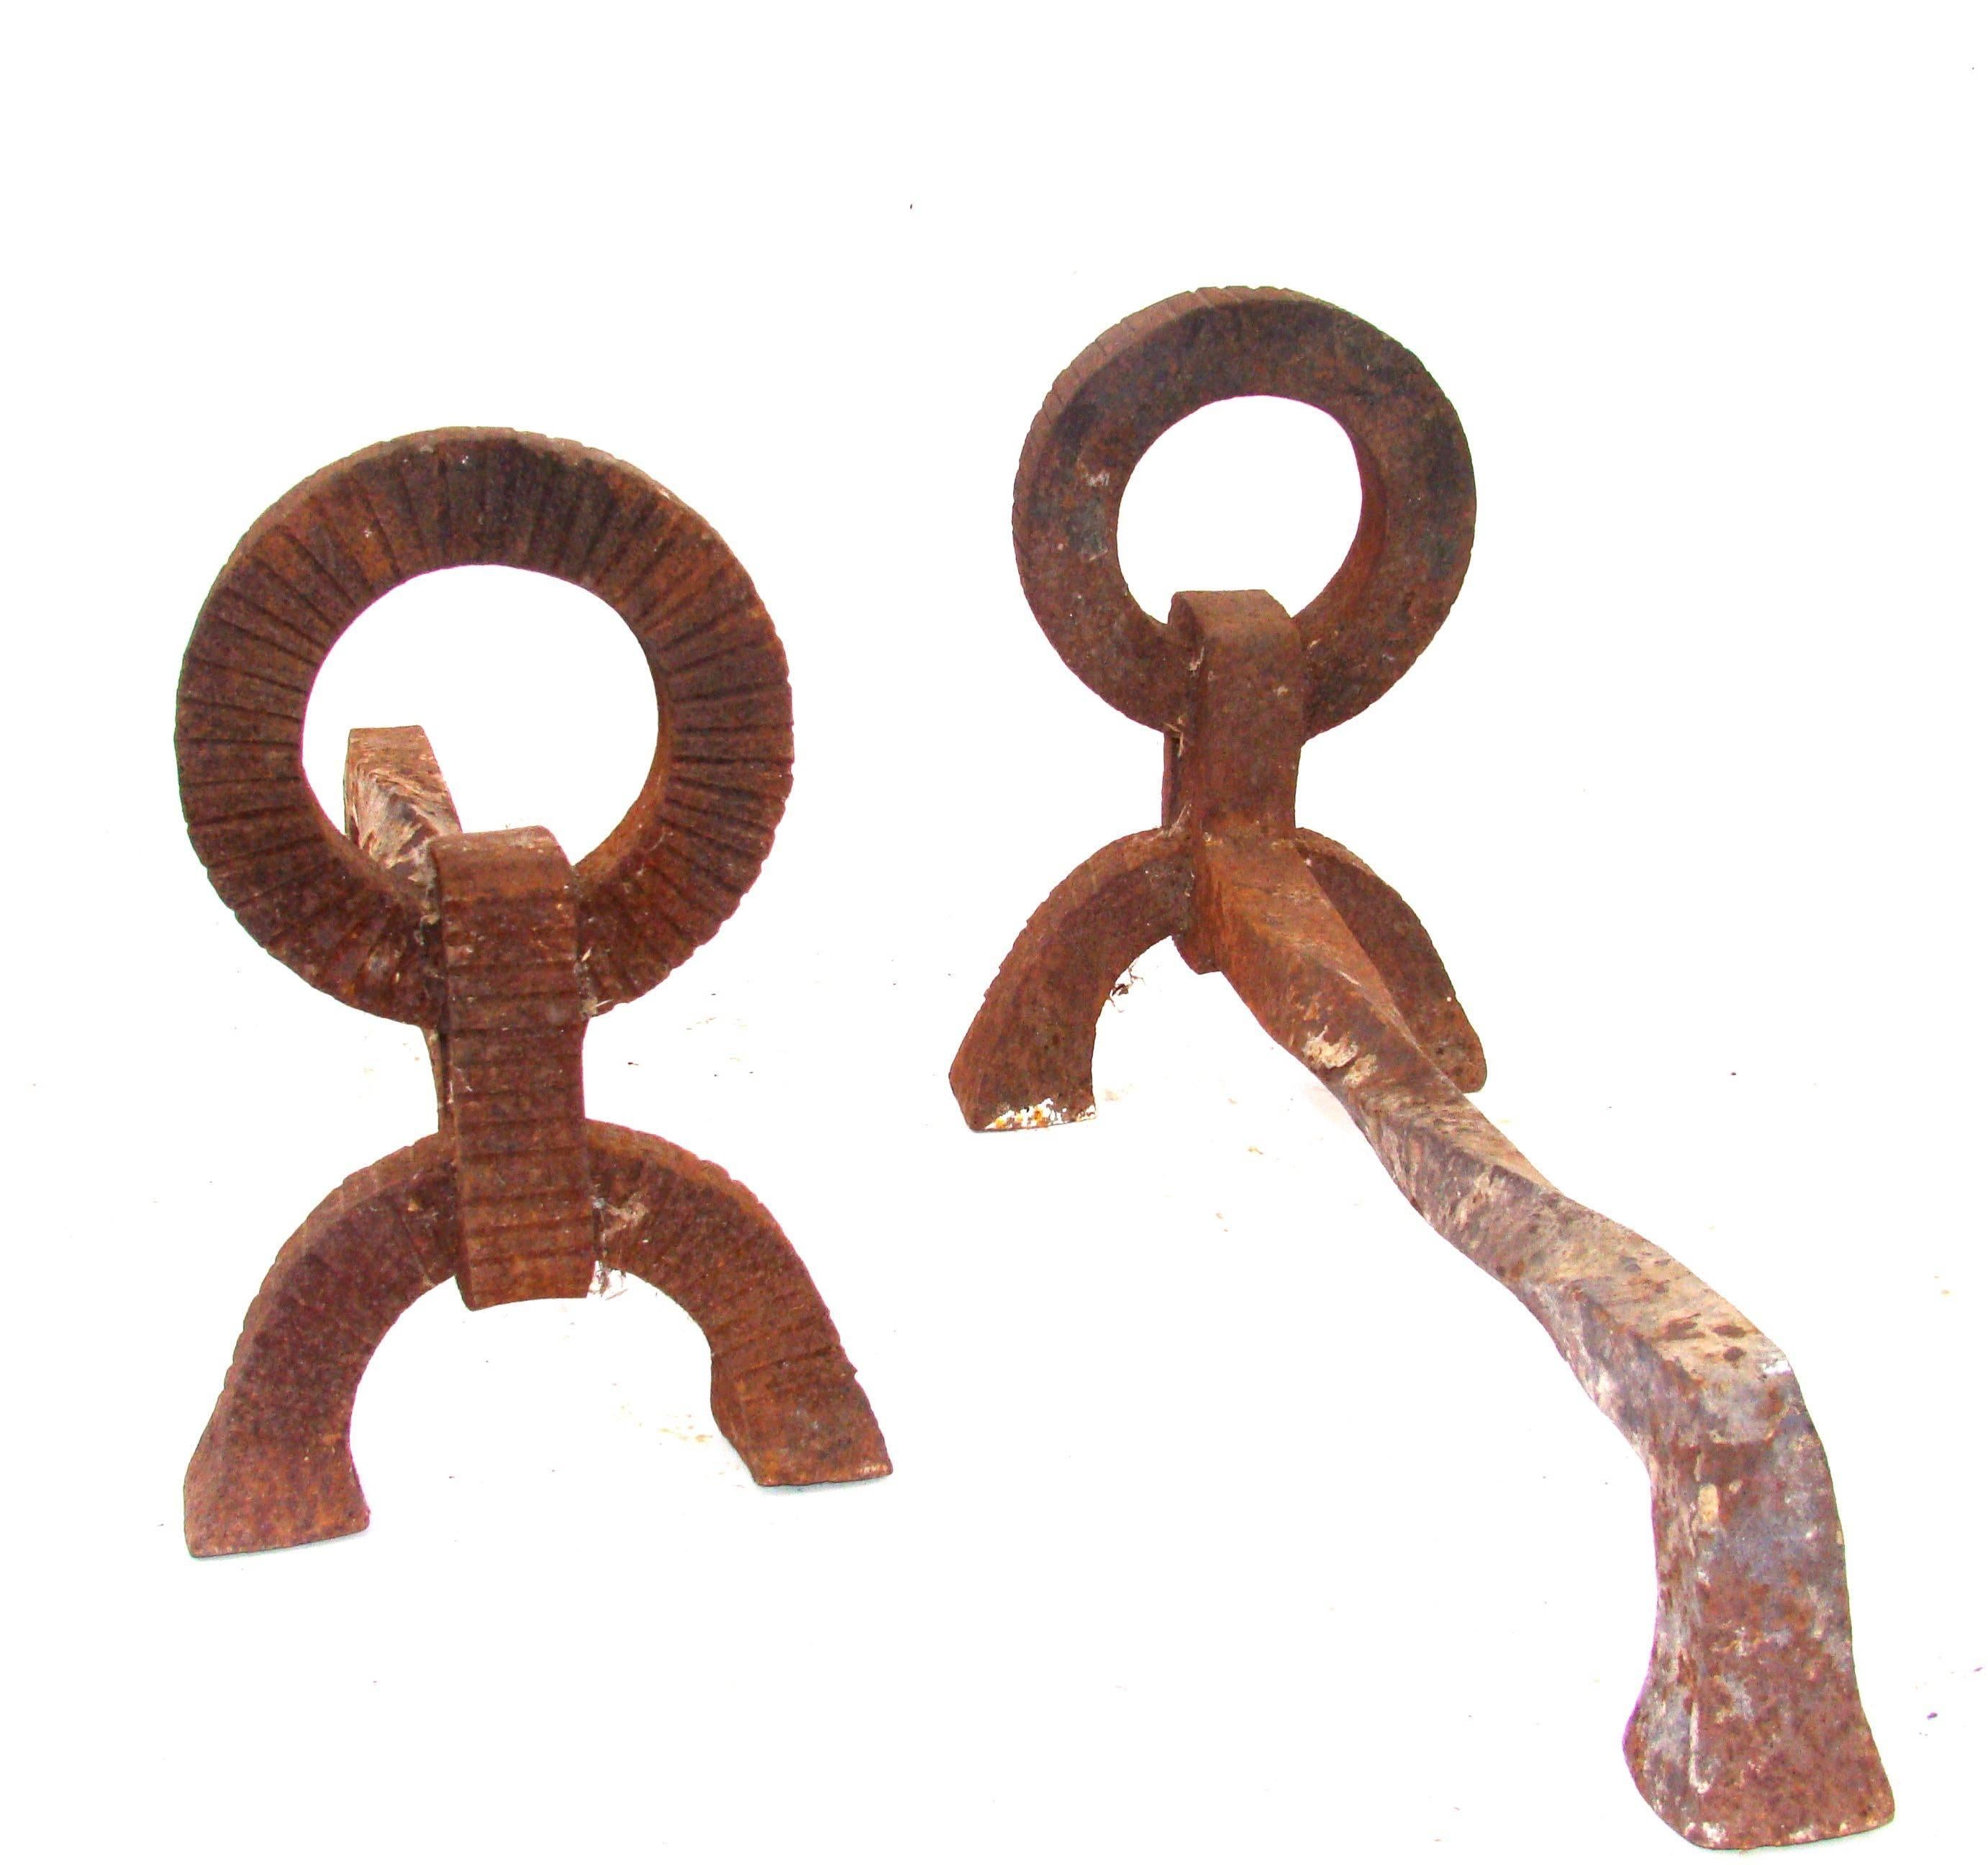 Pair of French wrought iron andirons by Jacques Adnet (Compagnie des Arts Français), circa 1940. Decorated with a large ring pattern with ridges.